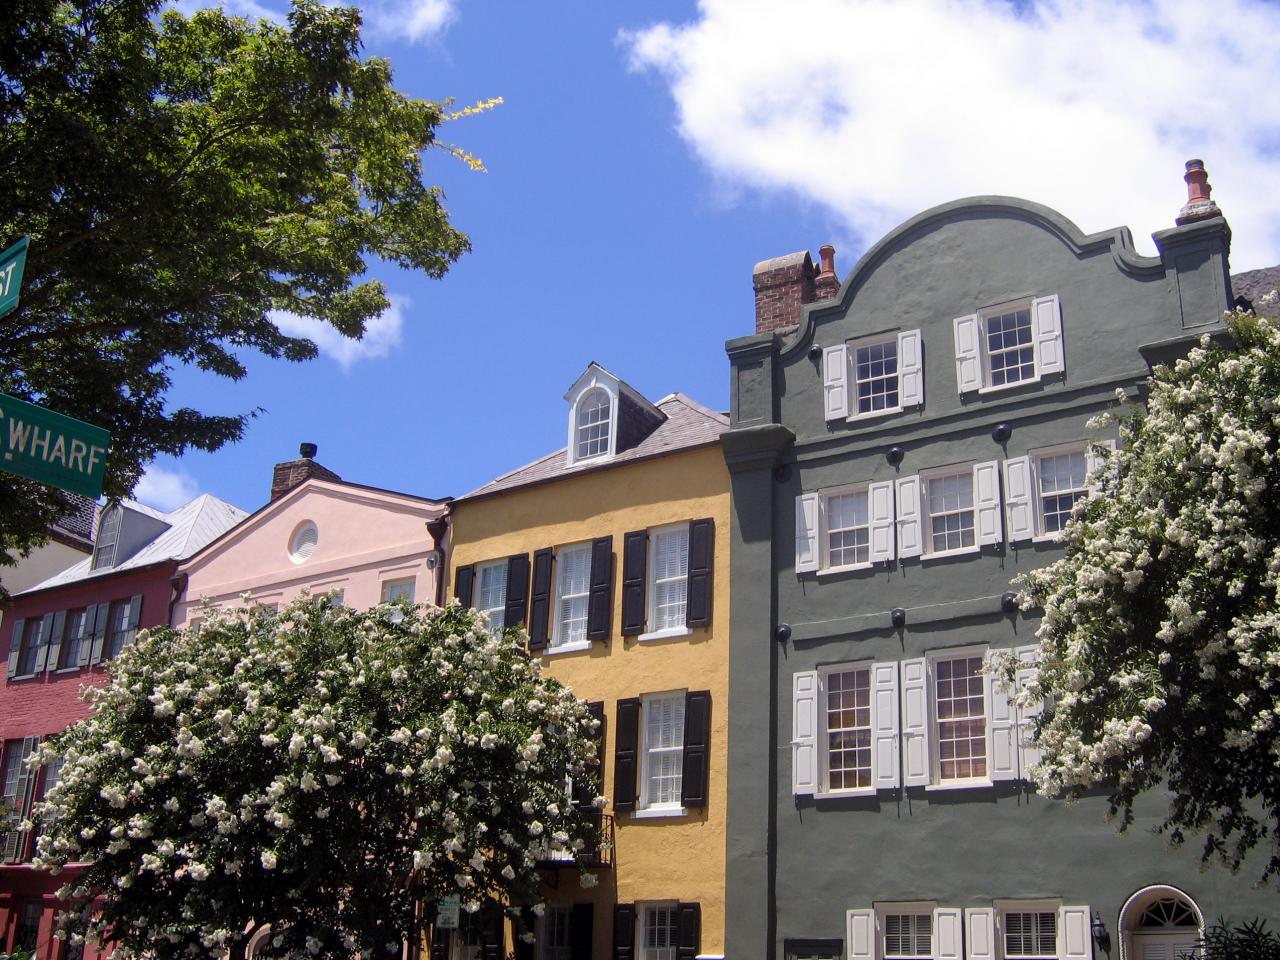  Channel Charleston's Vibrant Rainbow Row With These Exterior Paint Colors's Decorating 